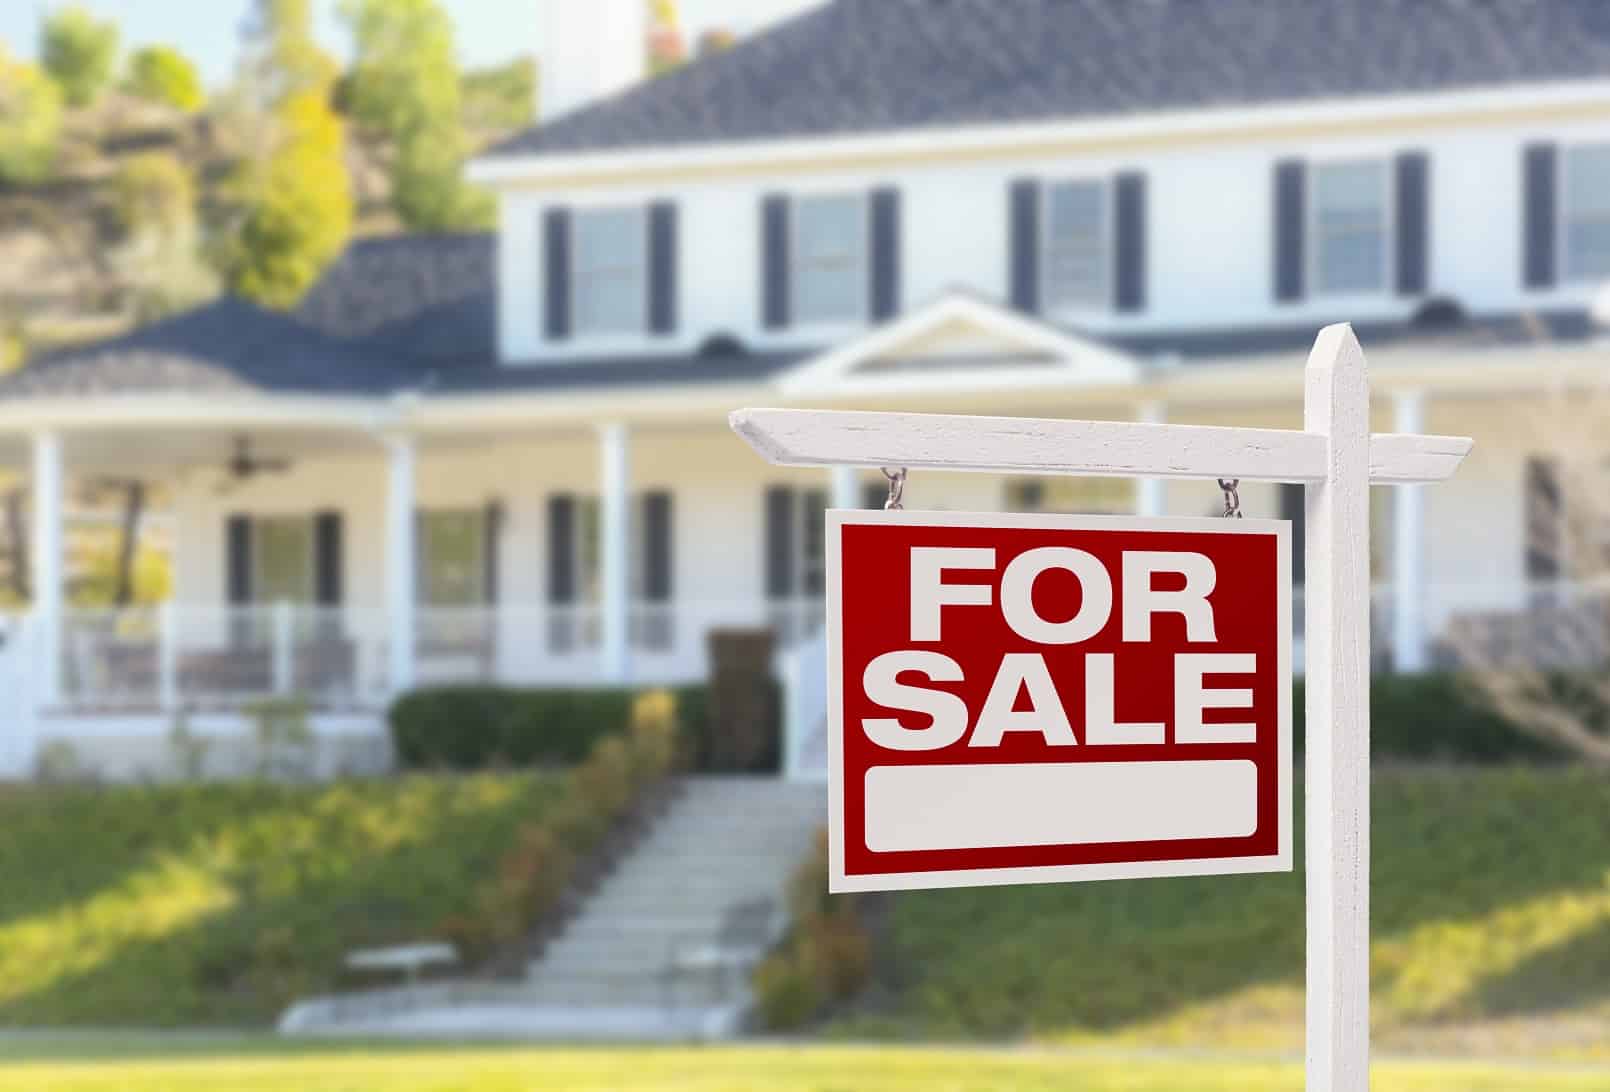 Should I Rent or Sell My House?